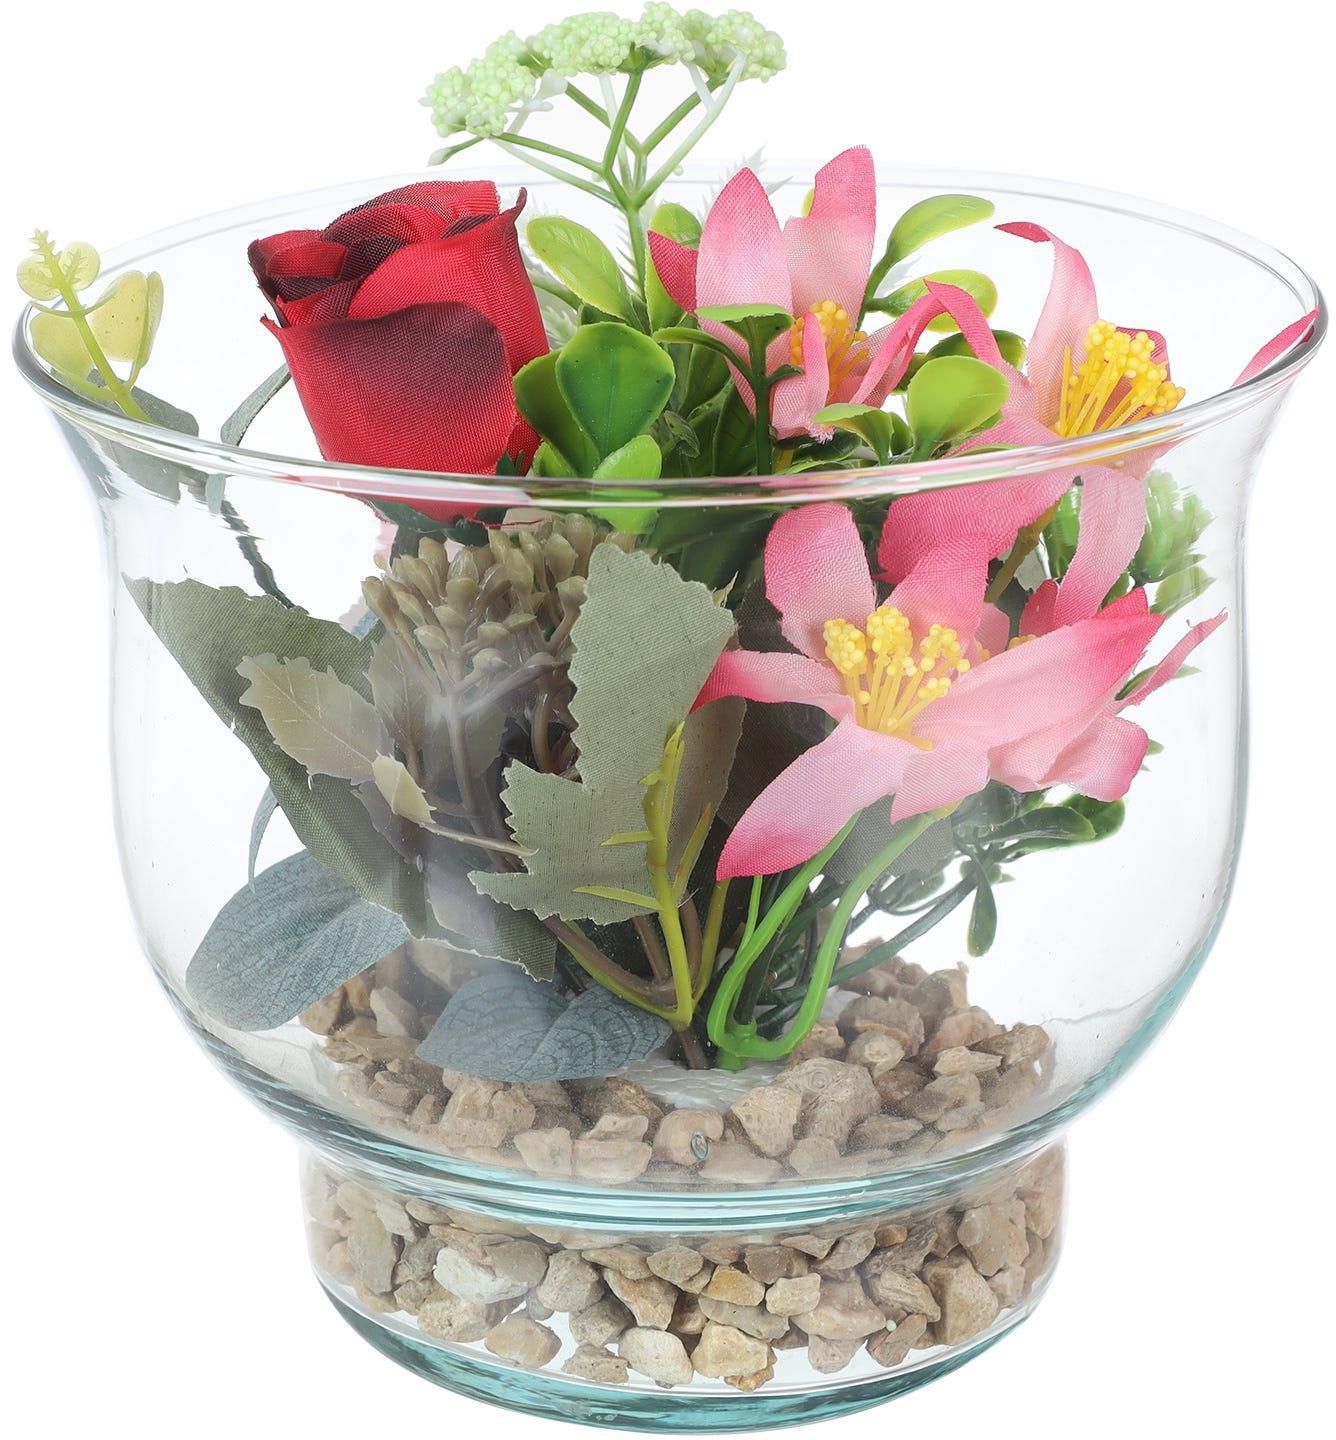 Get El Dawlia Glass Vase with Flowers, 13 cm - Multicolor with best offers | Raneen.com